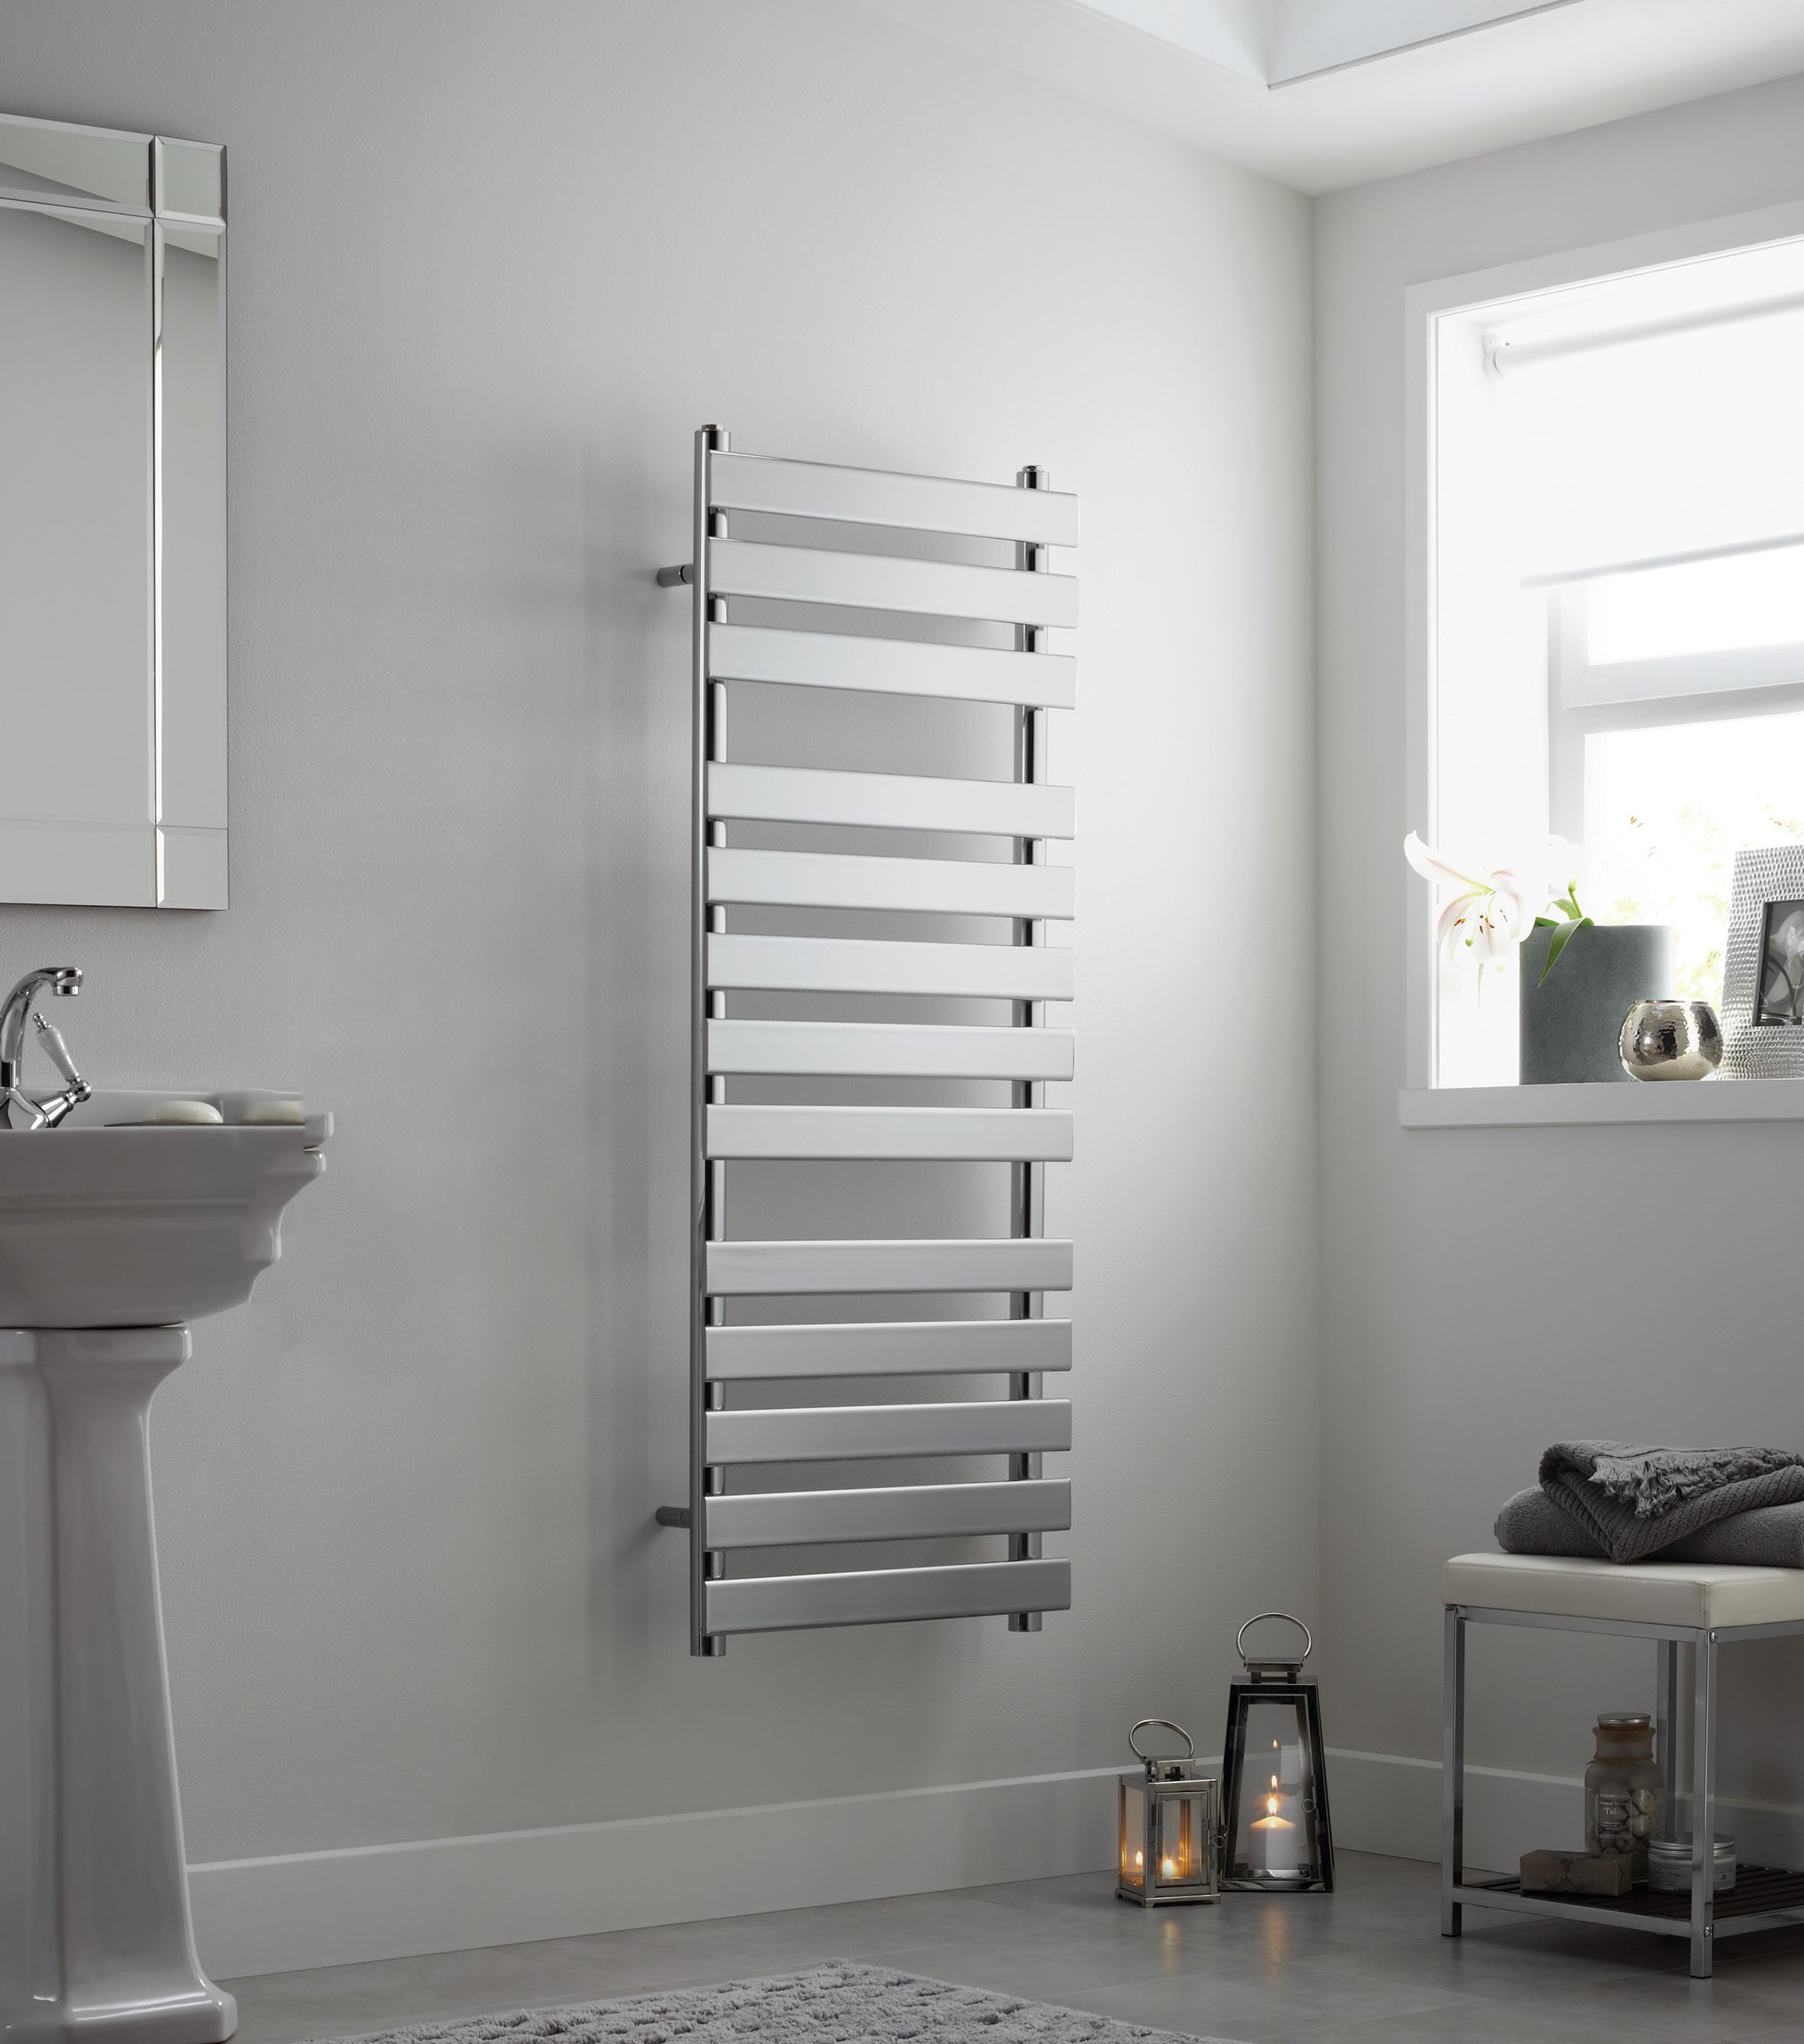 How To Fit a Towel Radiator